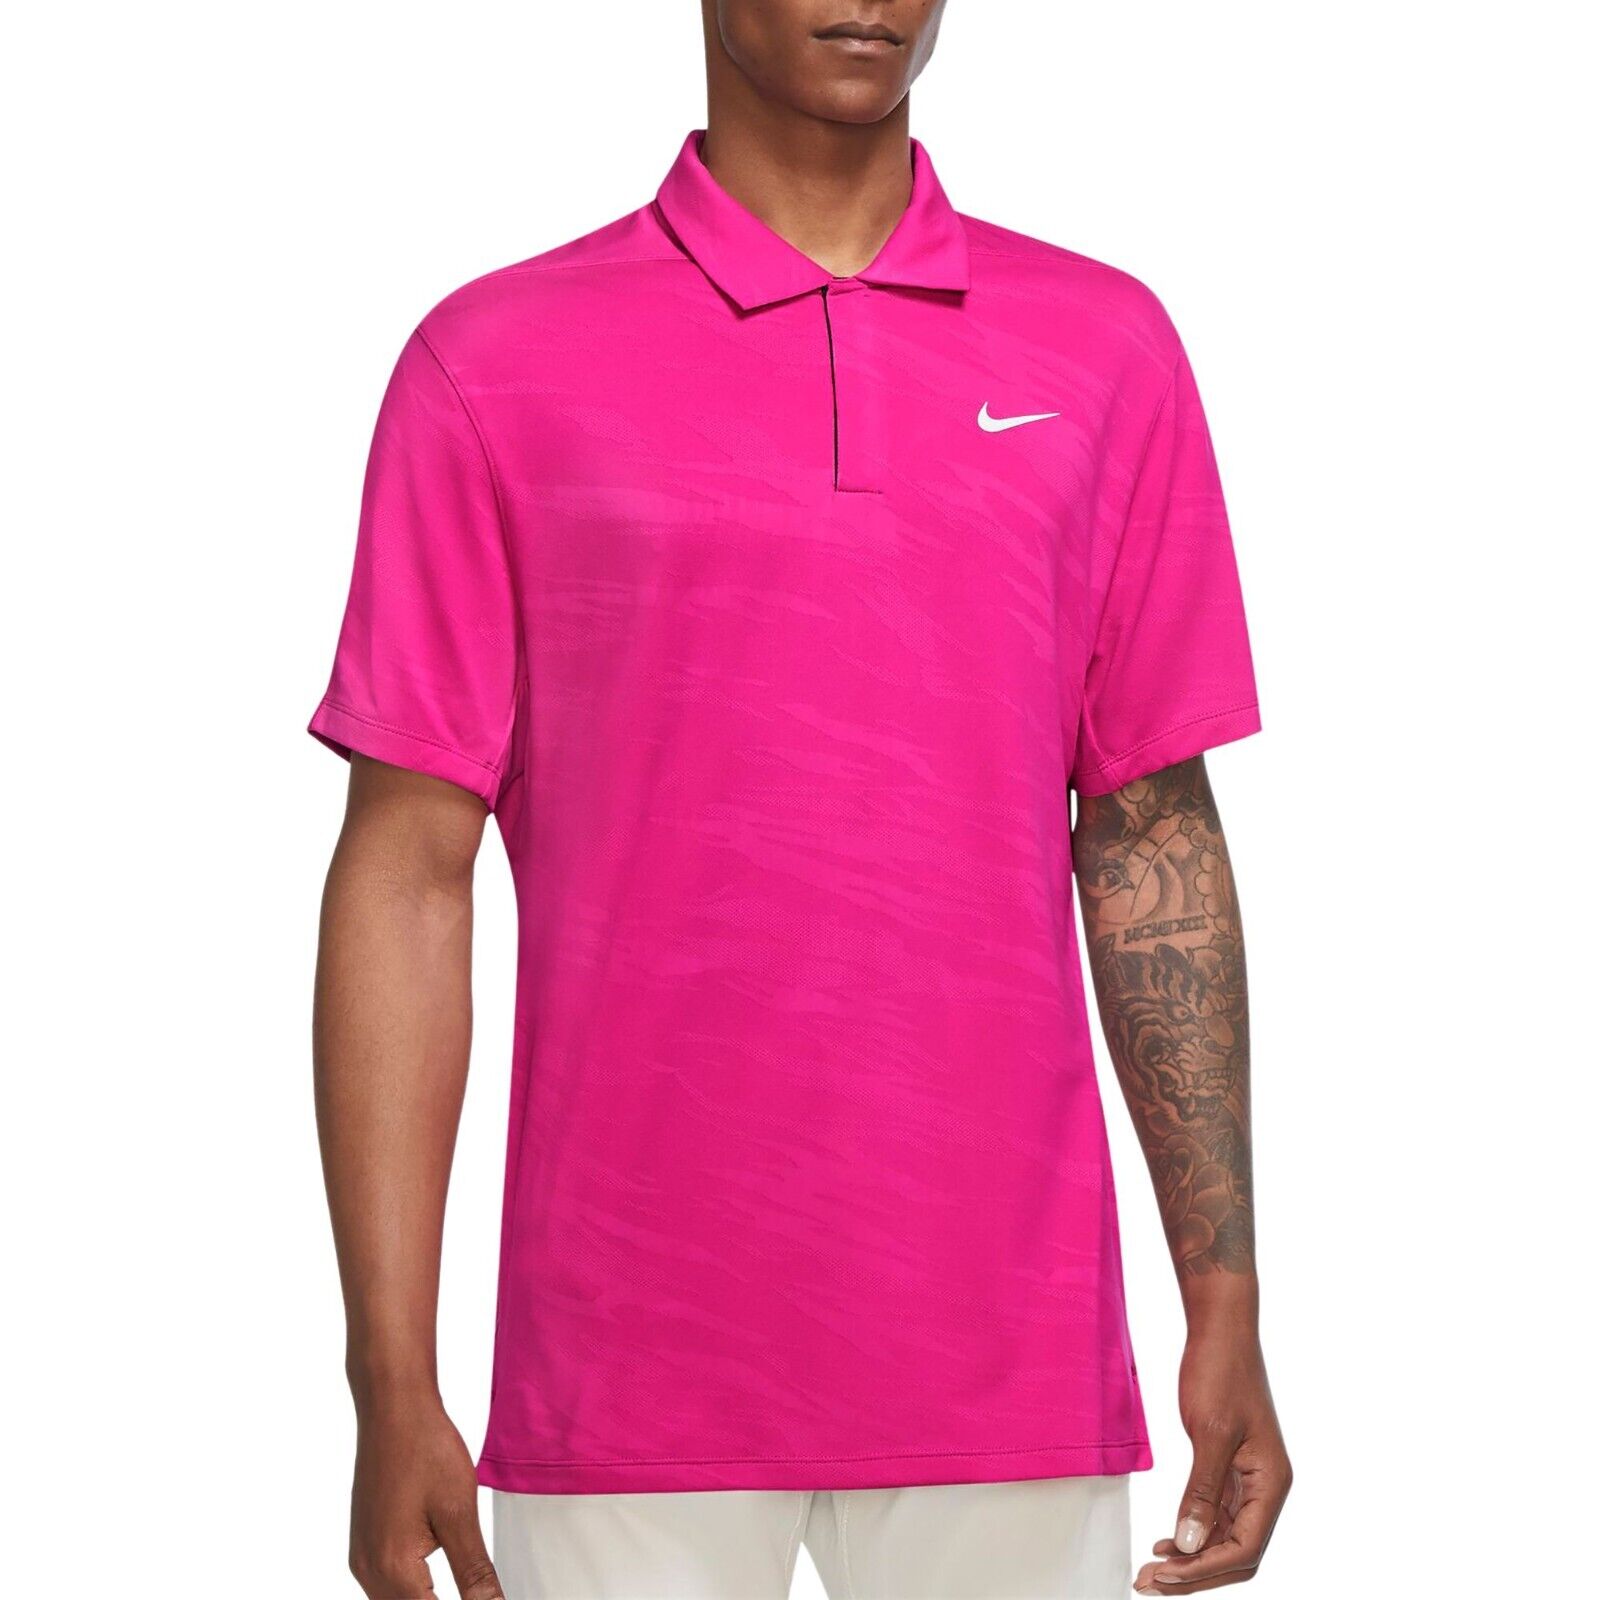 rely Hardness crisis Nike ADV Tiger Woods Men's Golf Polo Shirt Size M Pink DA3075-642 for sale  online | eBay